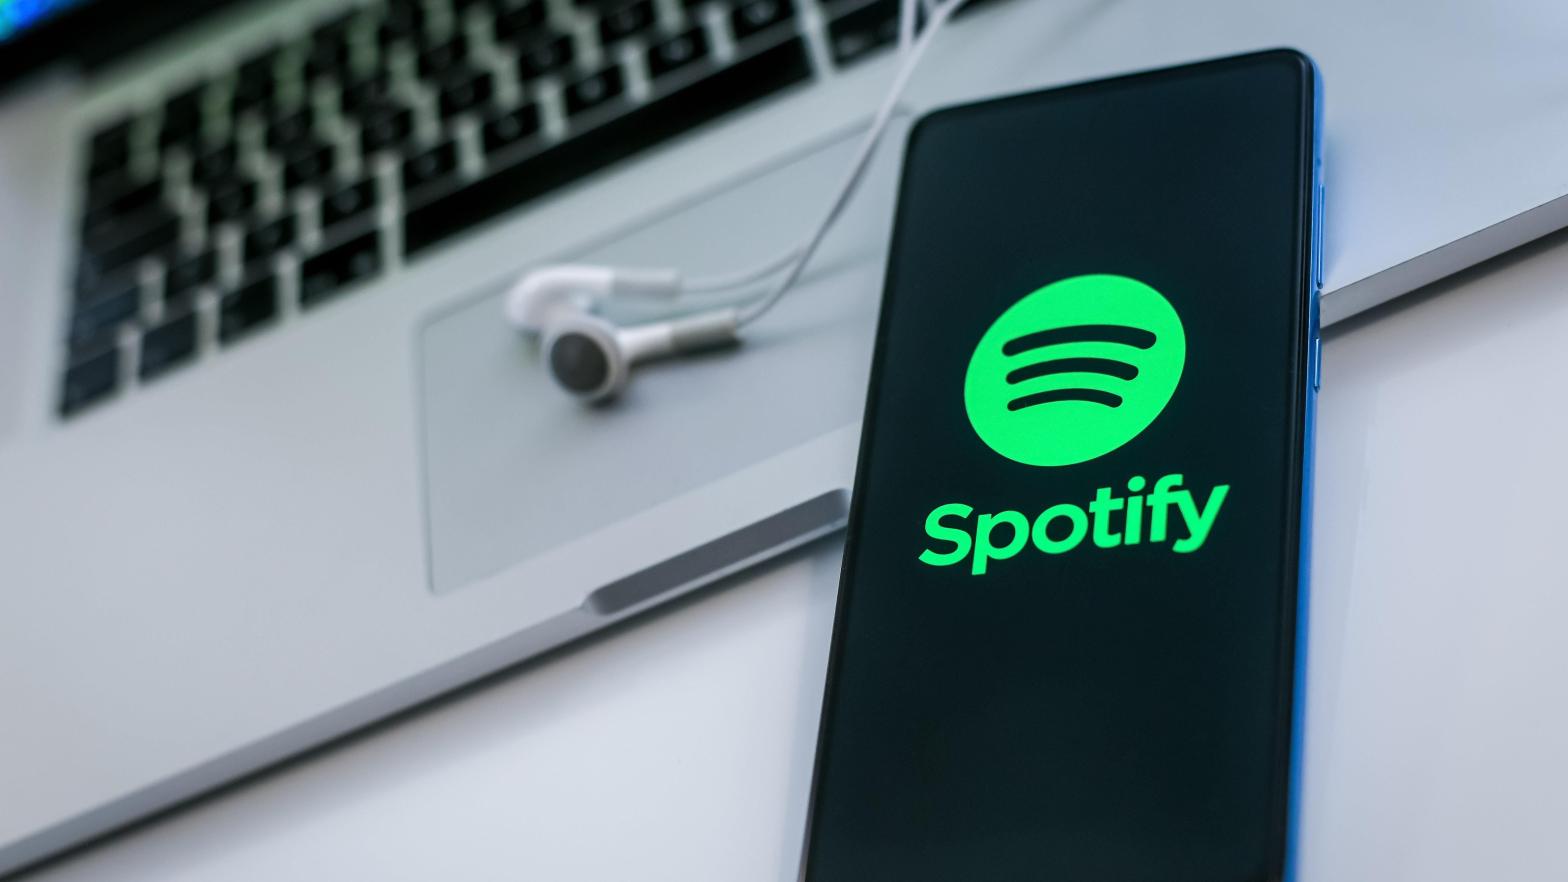 Spotify's new audiobook lineup requires you to visit the Spotify webpage in order to make the purchase, putting them in a strange place compared to the wide slate of existing audiobook apps. (Photo: Fabio Principe, Shutterstock)